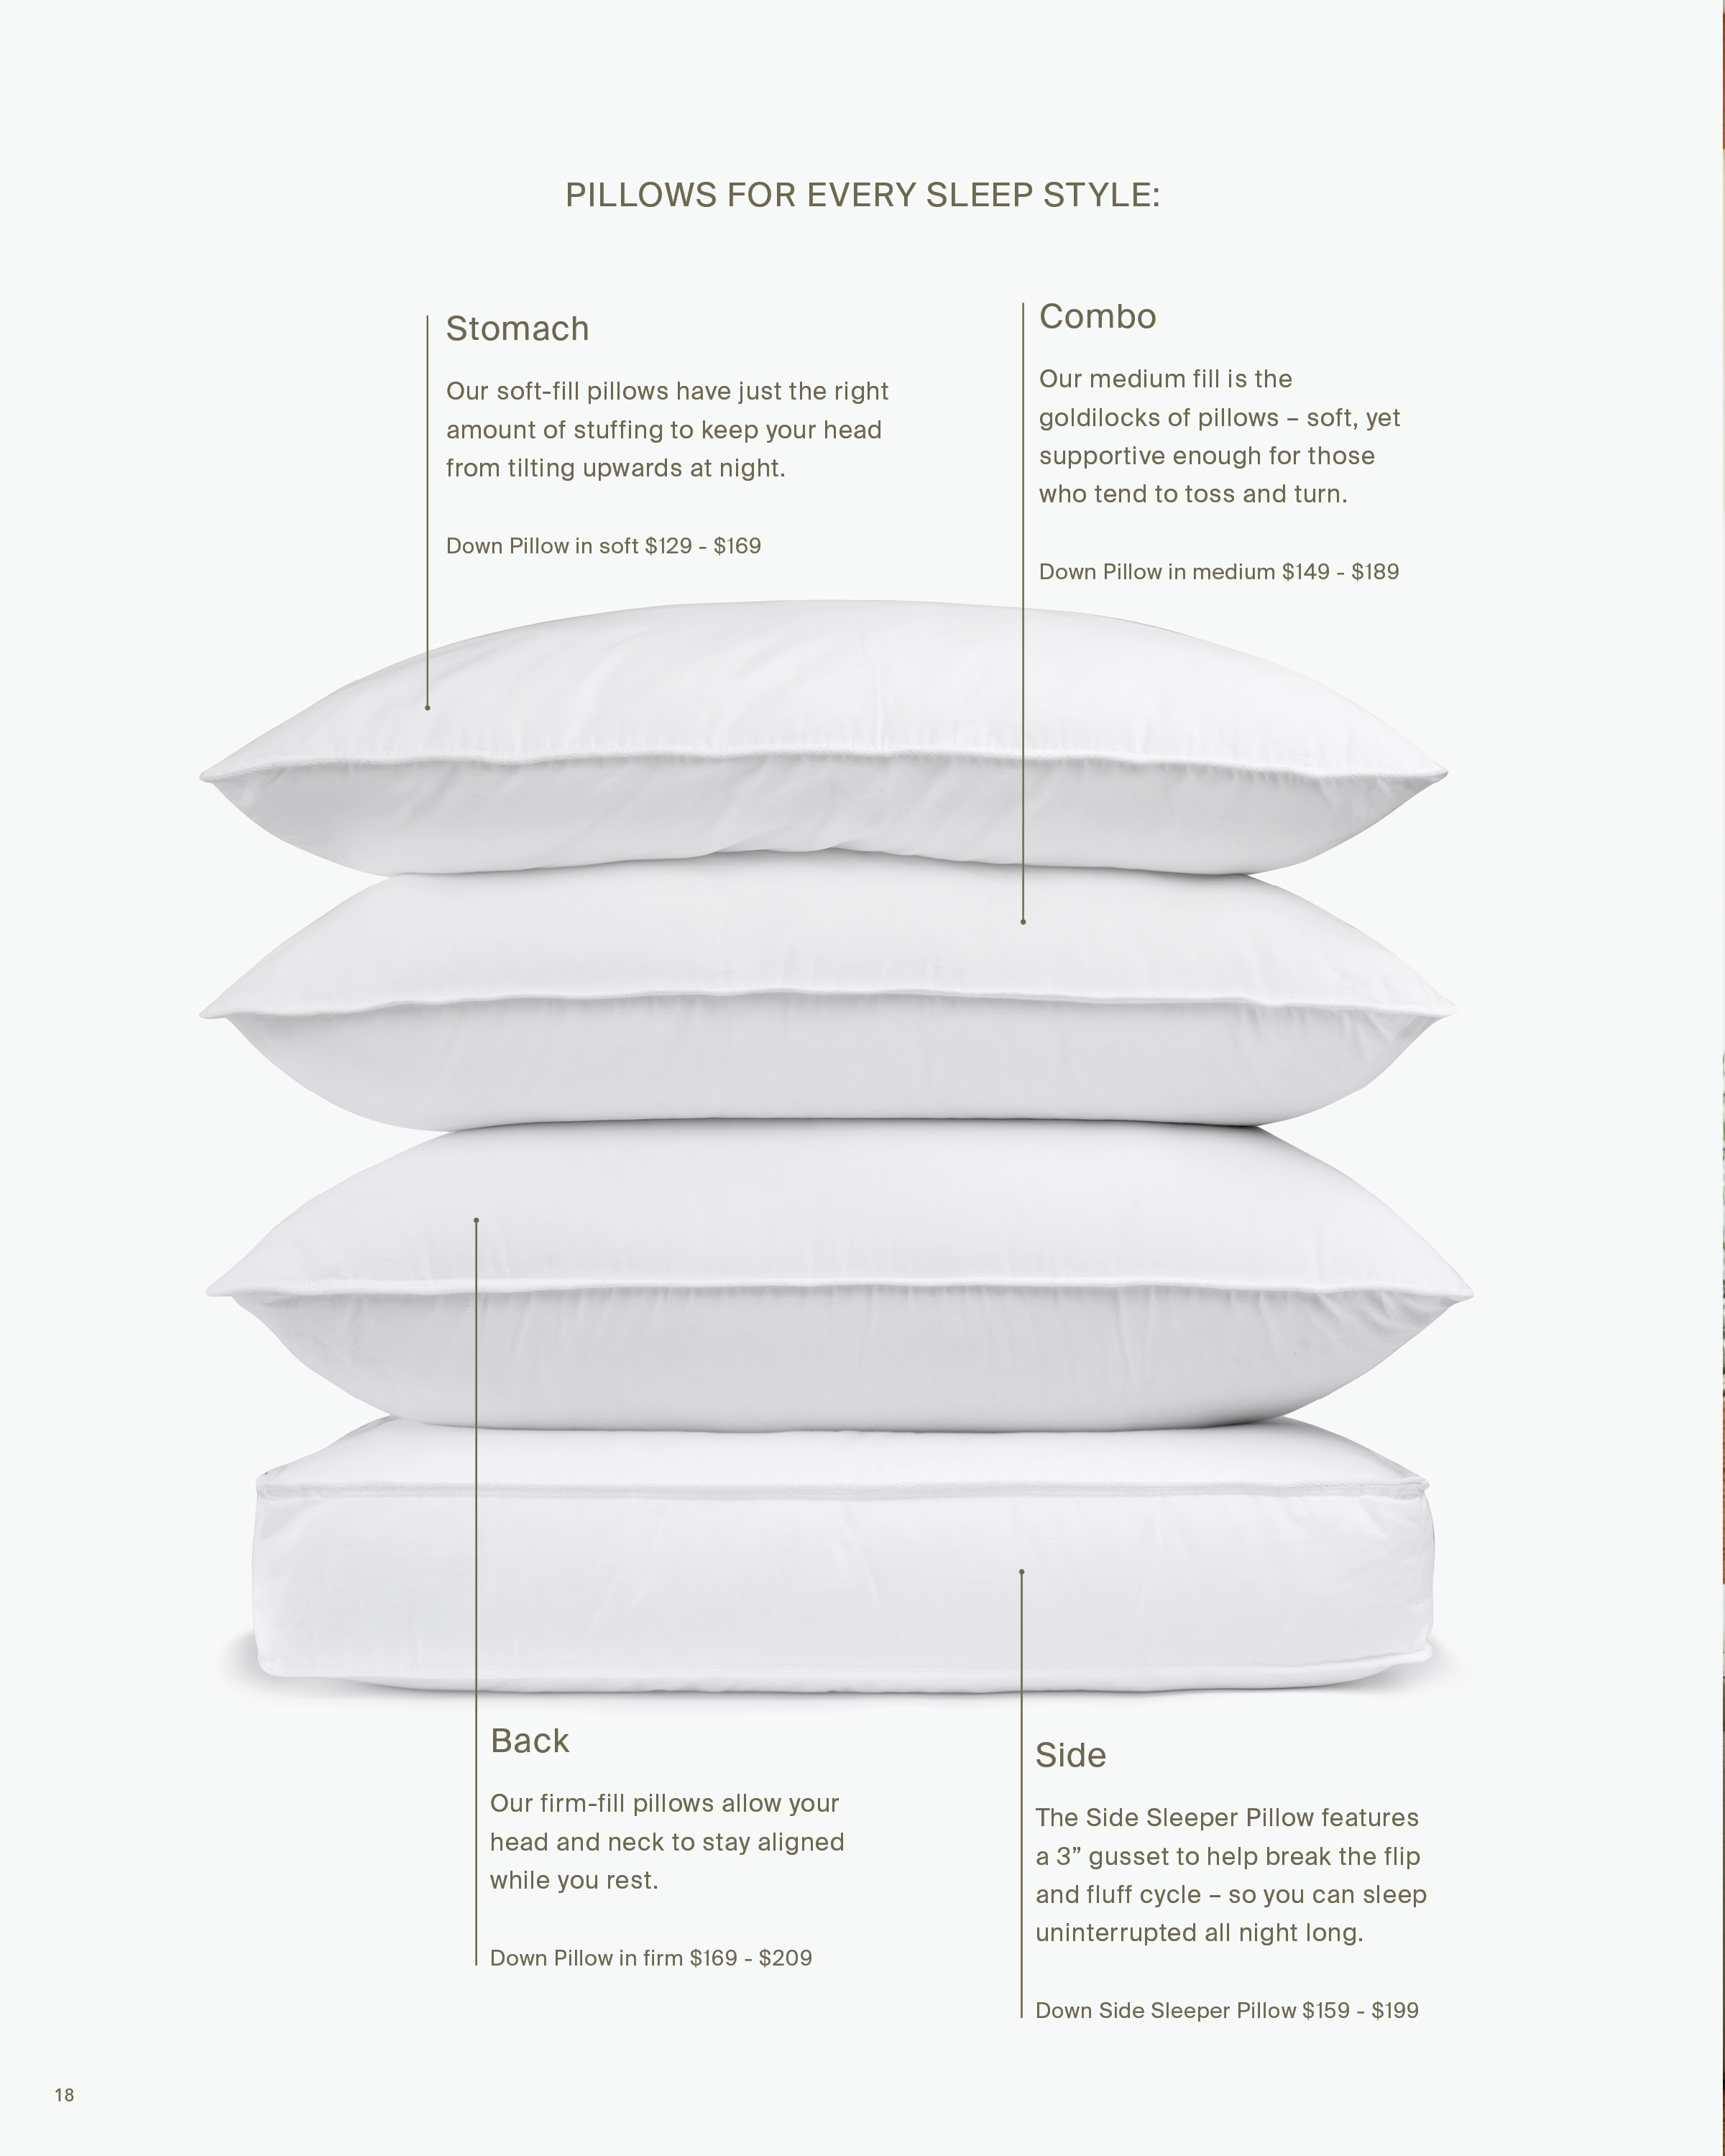 Four different types of pillows stacked in a tower